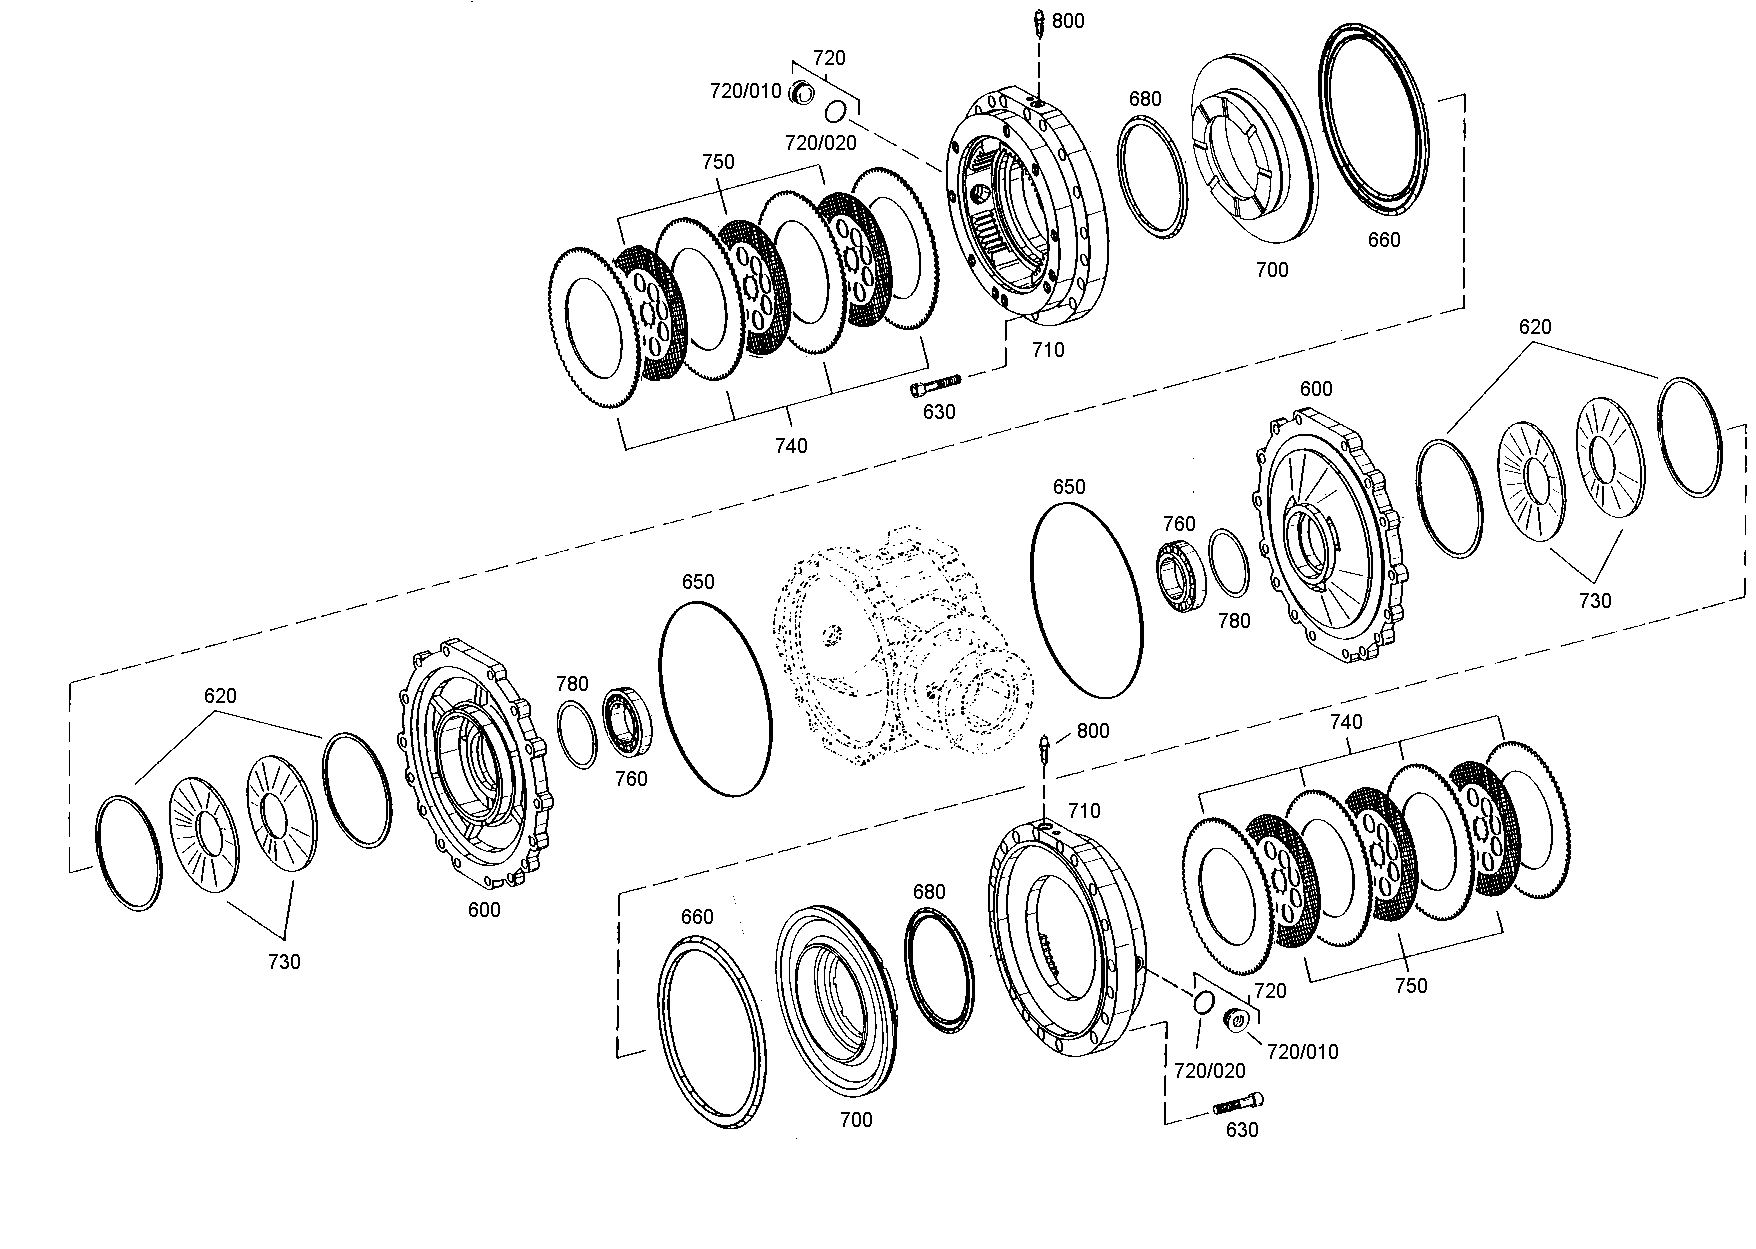 drawing for HAMM AG 1282301 - WASHER (figure 4)